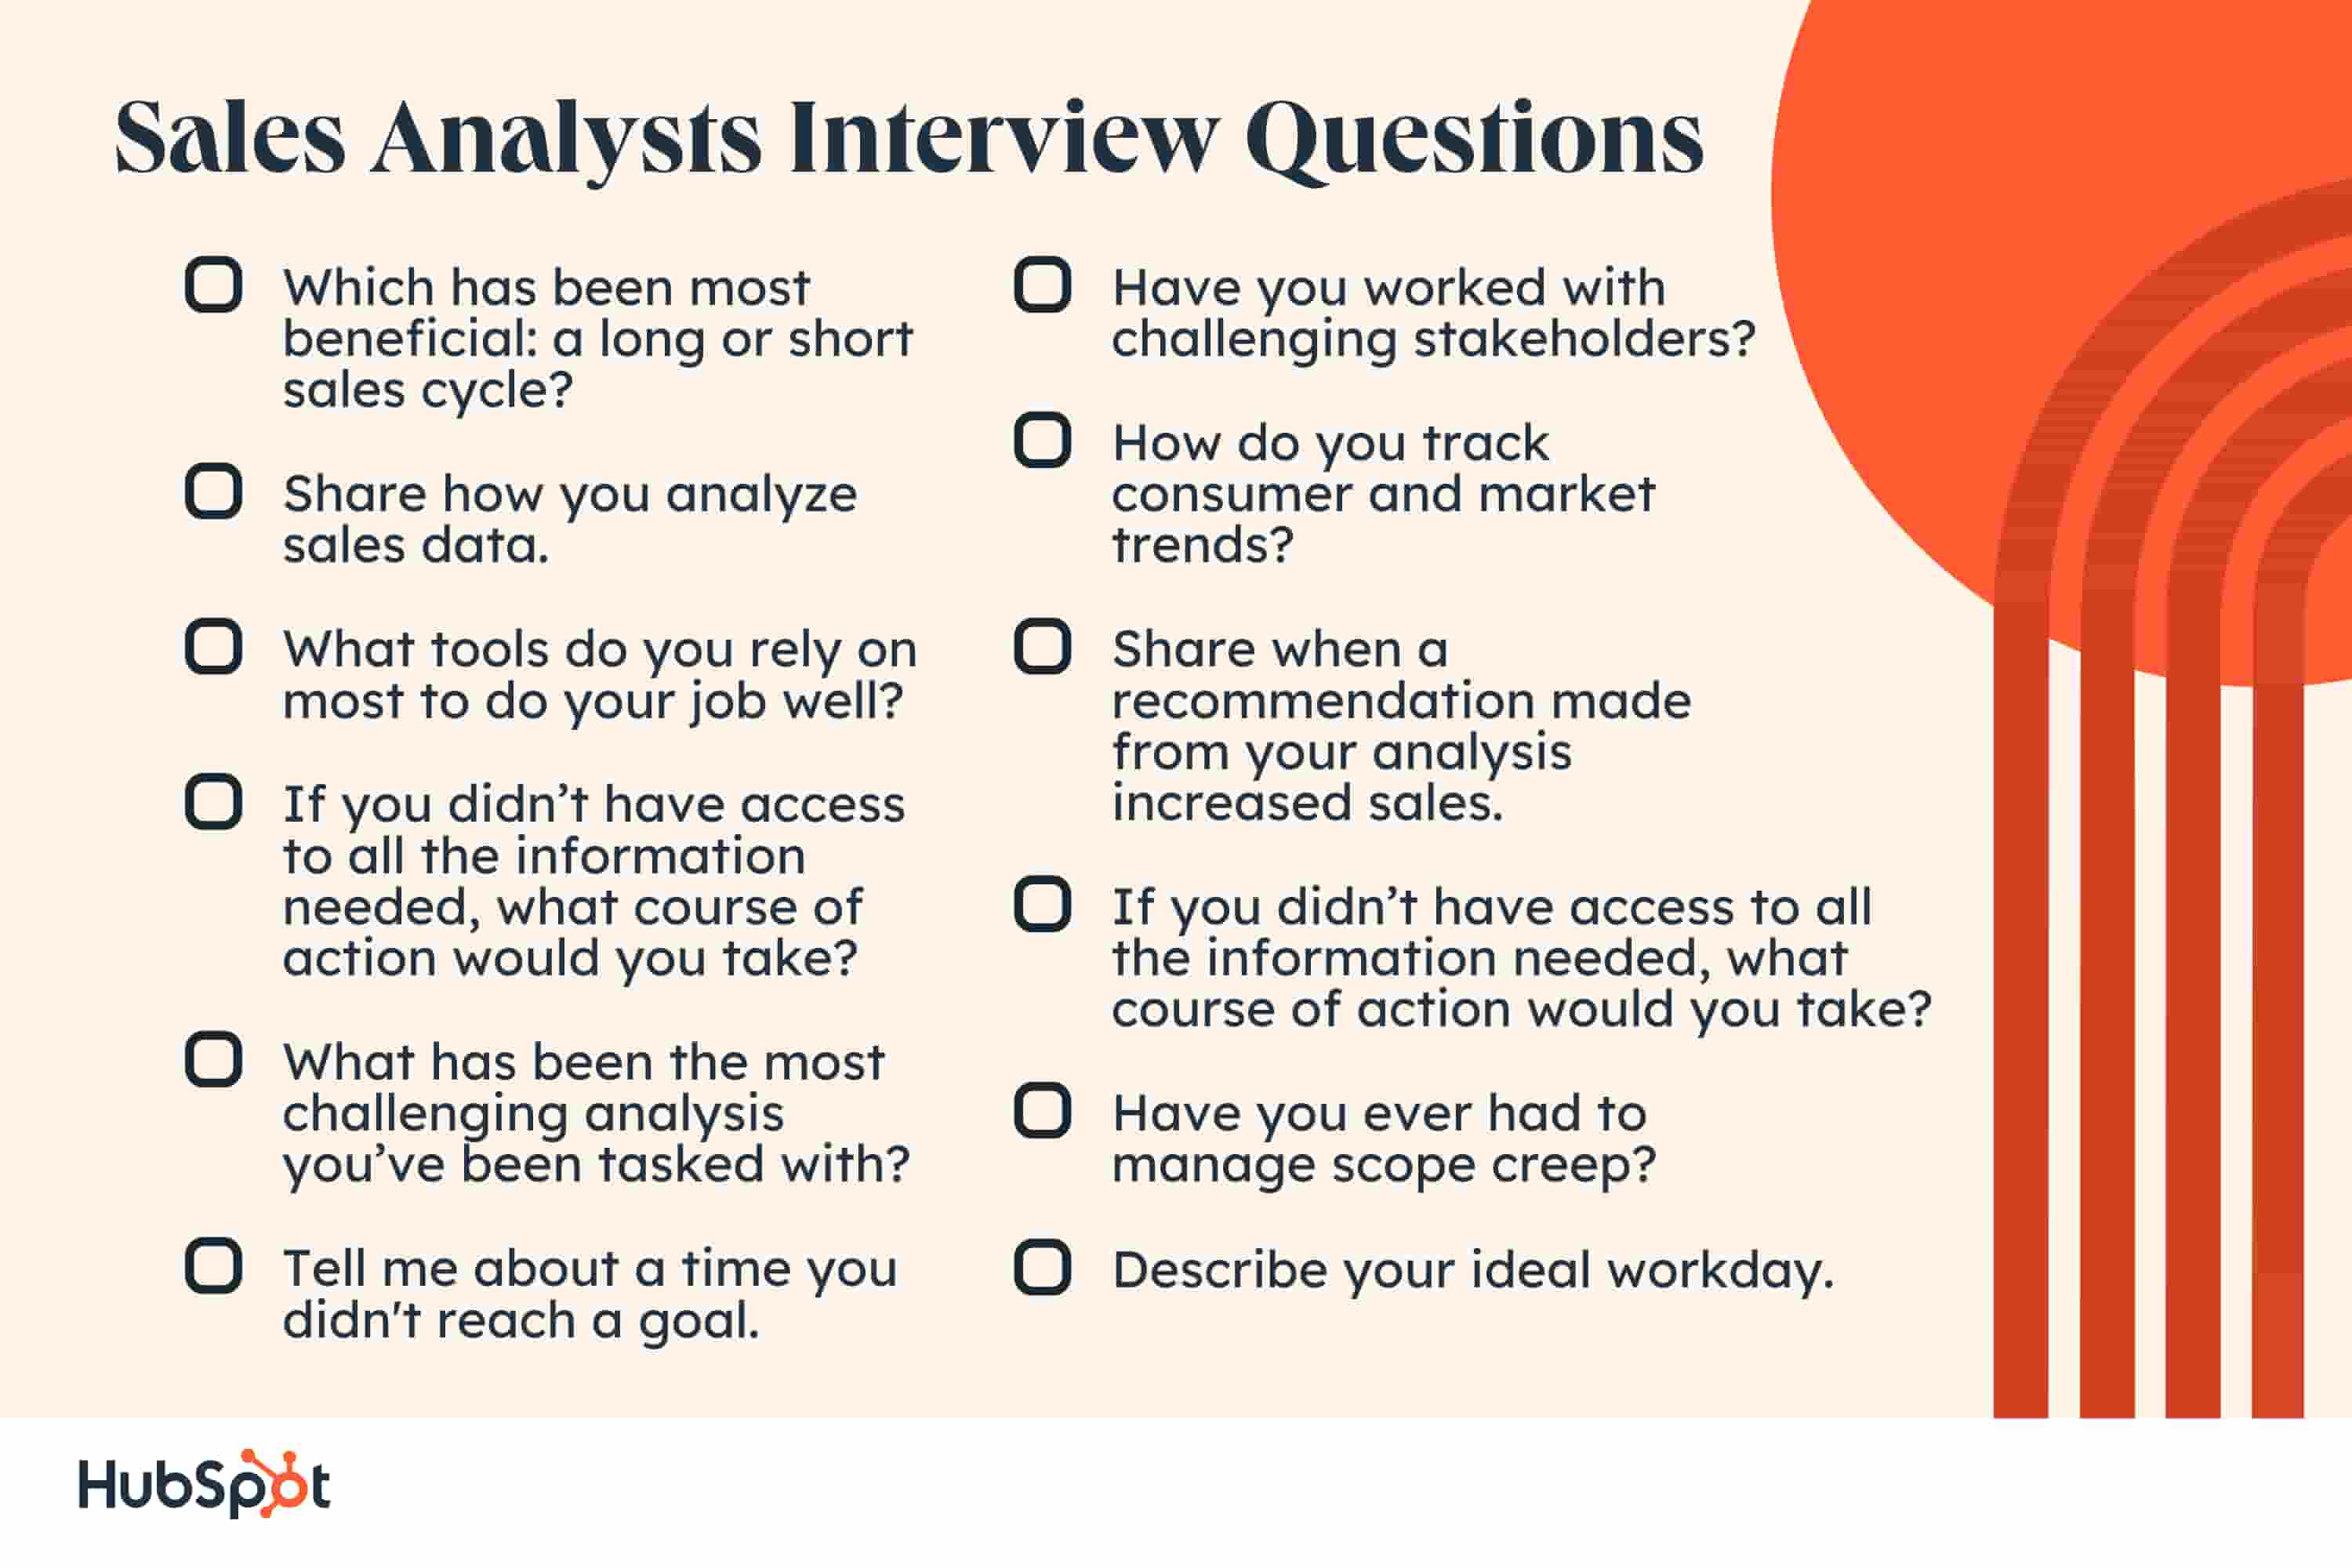 Sales Analysts Interview Questions. Which has been most beneficial: a long or short sales cycle? Share how you analyze sales data. What tools do you rely on most to do your job well? If you didn’t have access to all the information needed, what course of action would you take? What has been the most challenging analysis you’ve been tasked with? Tell me about a time you didn't reach a goal. Have you worked with challenging stakeholders? How do you track consumer and market trends? Share when a recommendation made from your analysis increased sales. If you didn’t have access to all the information needed, what course of action would you take? Have you ever had to manage scope creep? Describe your ideal workday.